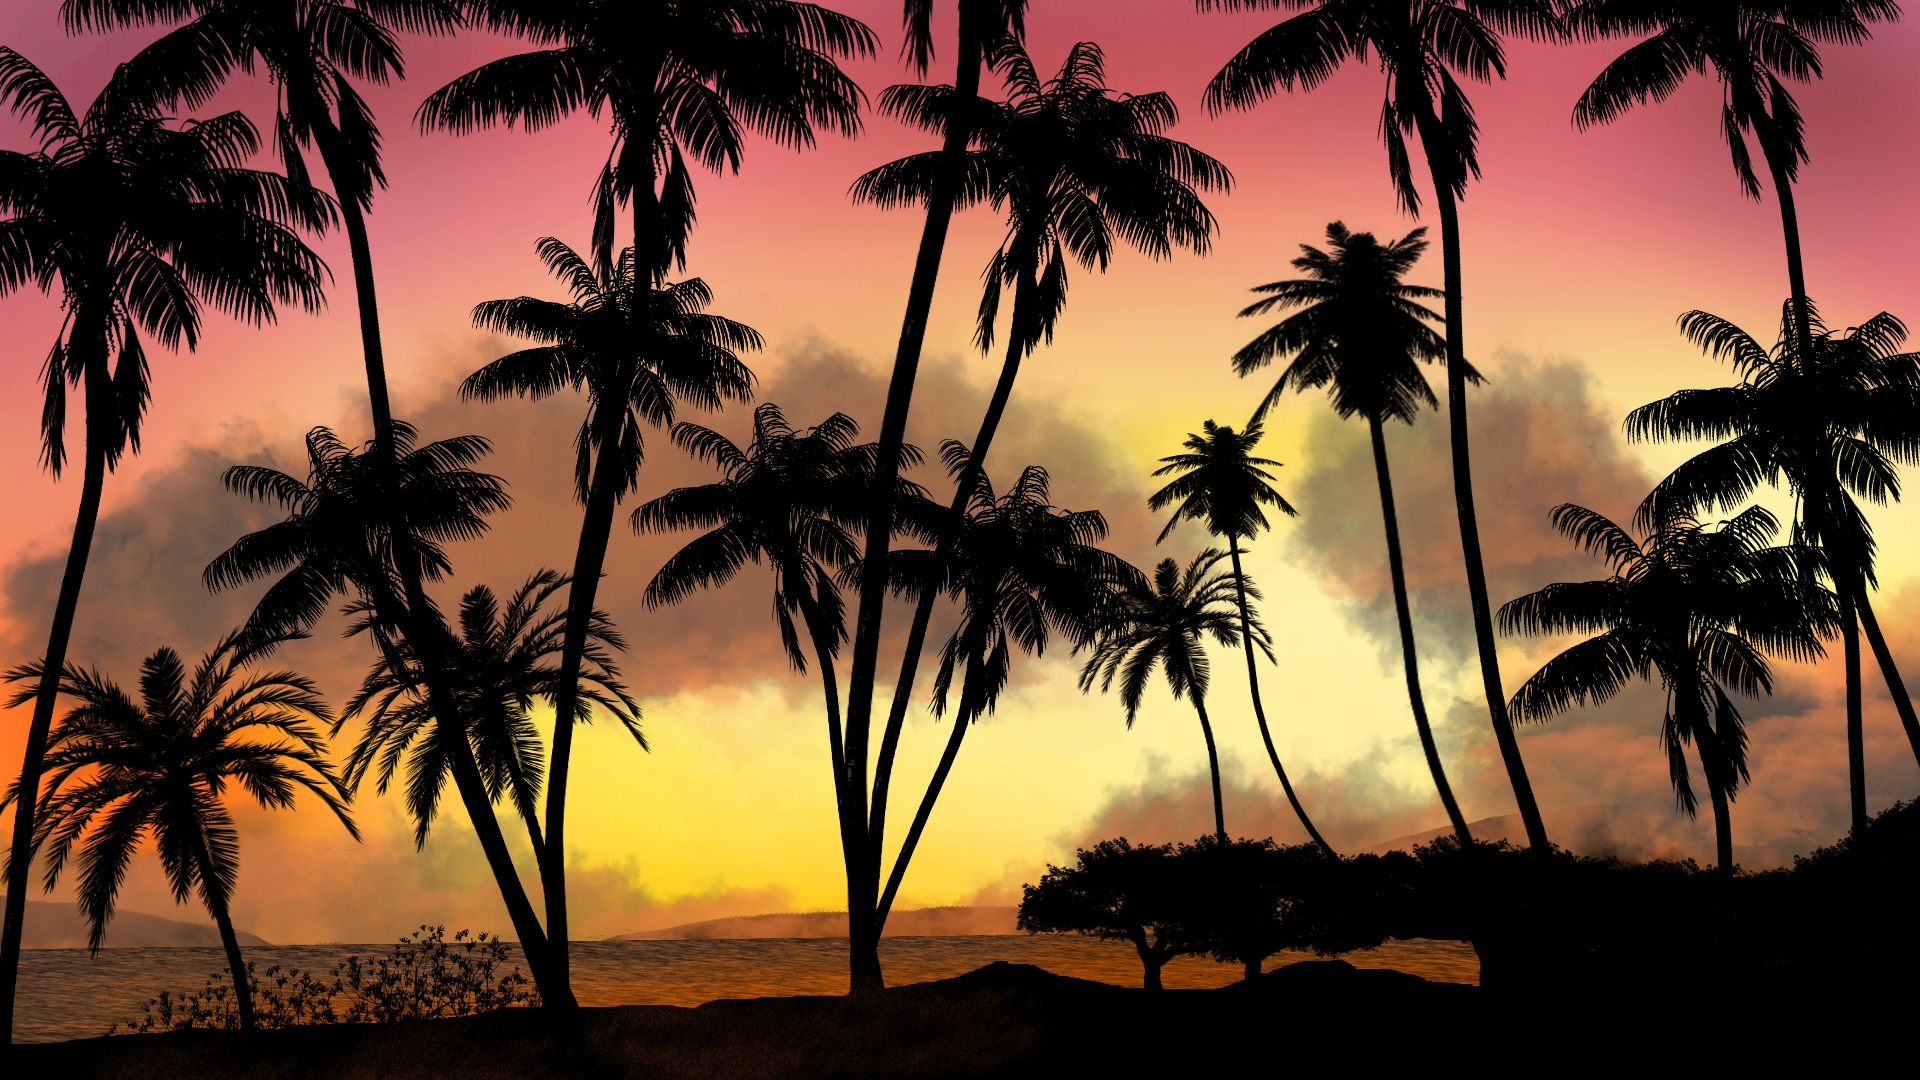 General 1920x1080 landscape nature tropical colorful palm trees silhouette sunset sunset glow clouds water sky